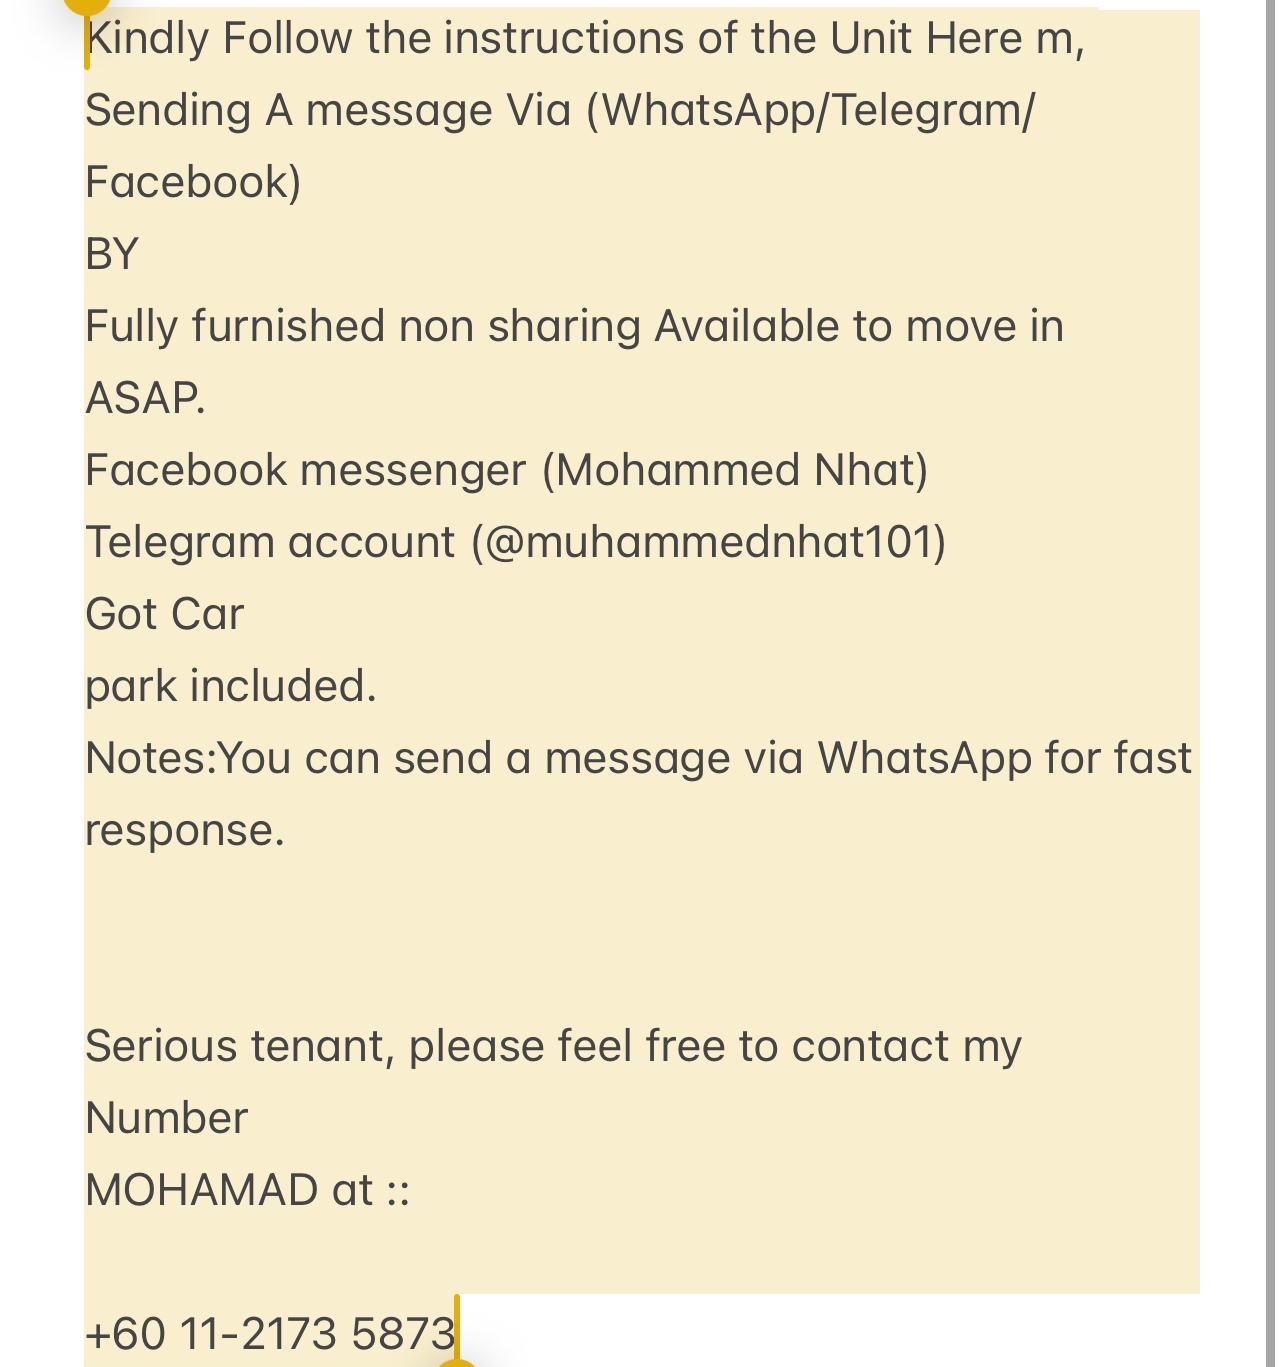 room for rent, single room, 15050 kota bharu, Send the owner a message on WhatsApp/facebook if you want to RENT the unit facebook (Mohammed Nhat)&Telegram(@muhammednhat101) Fully furnished non sharing :(comfortable)